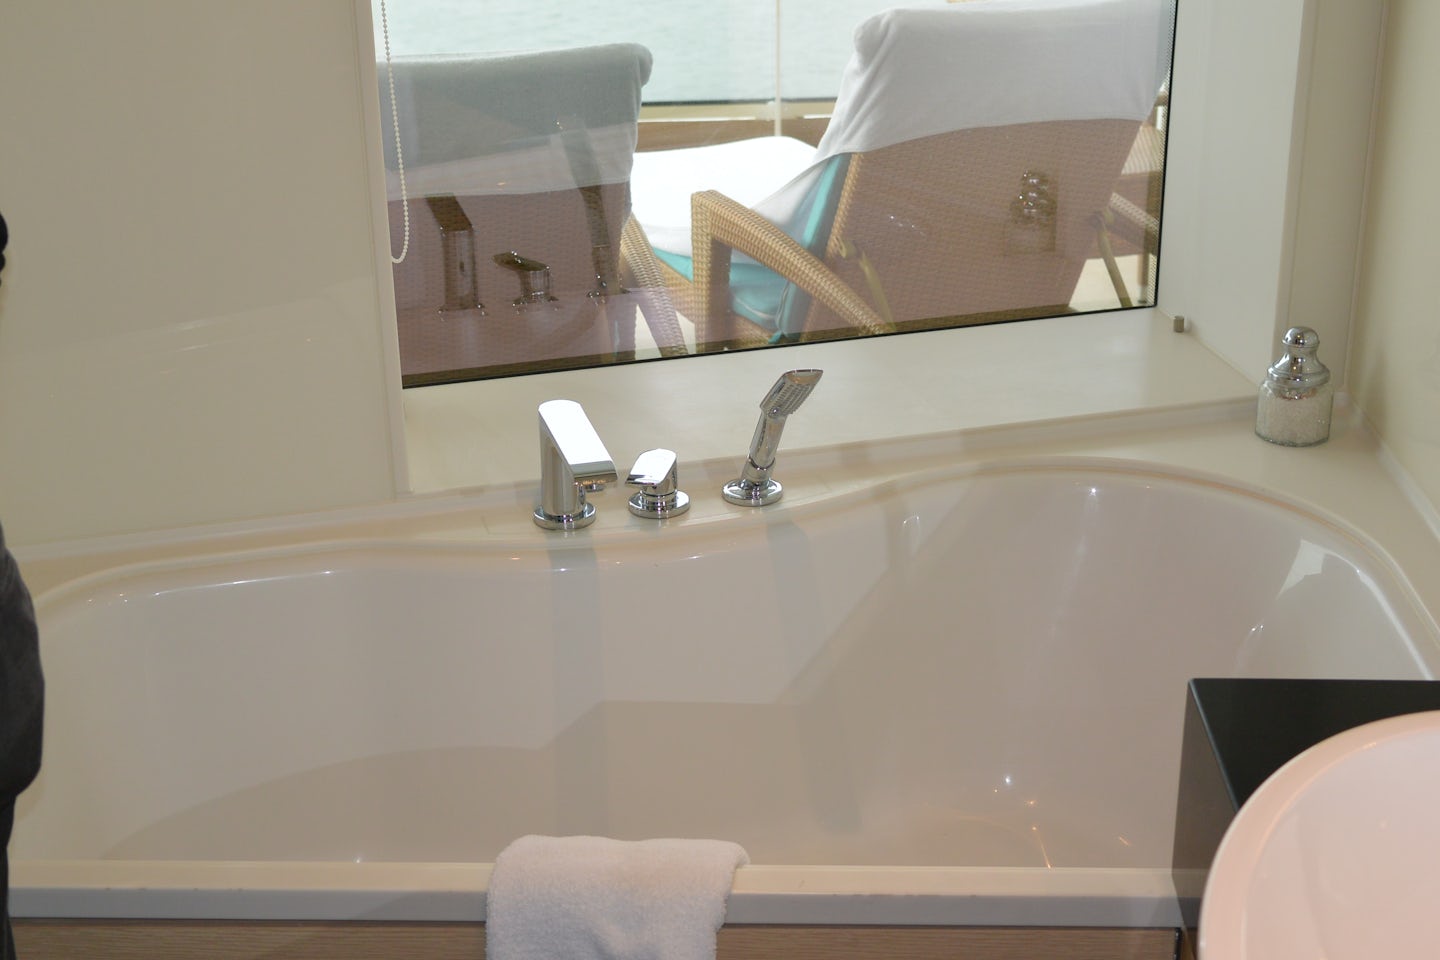 Soaking tub in Haven aft suite 10912